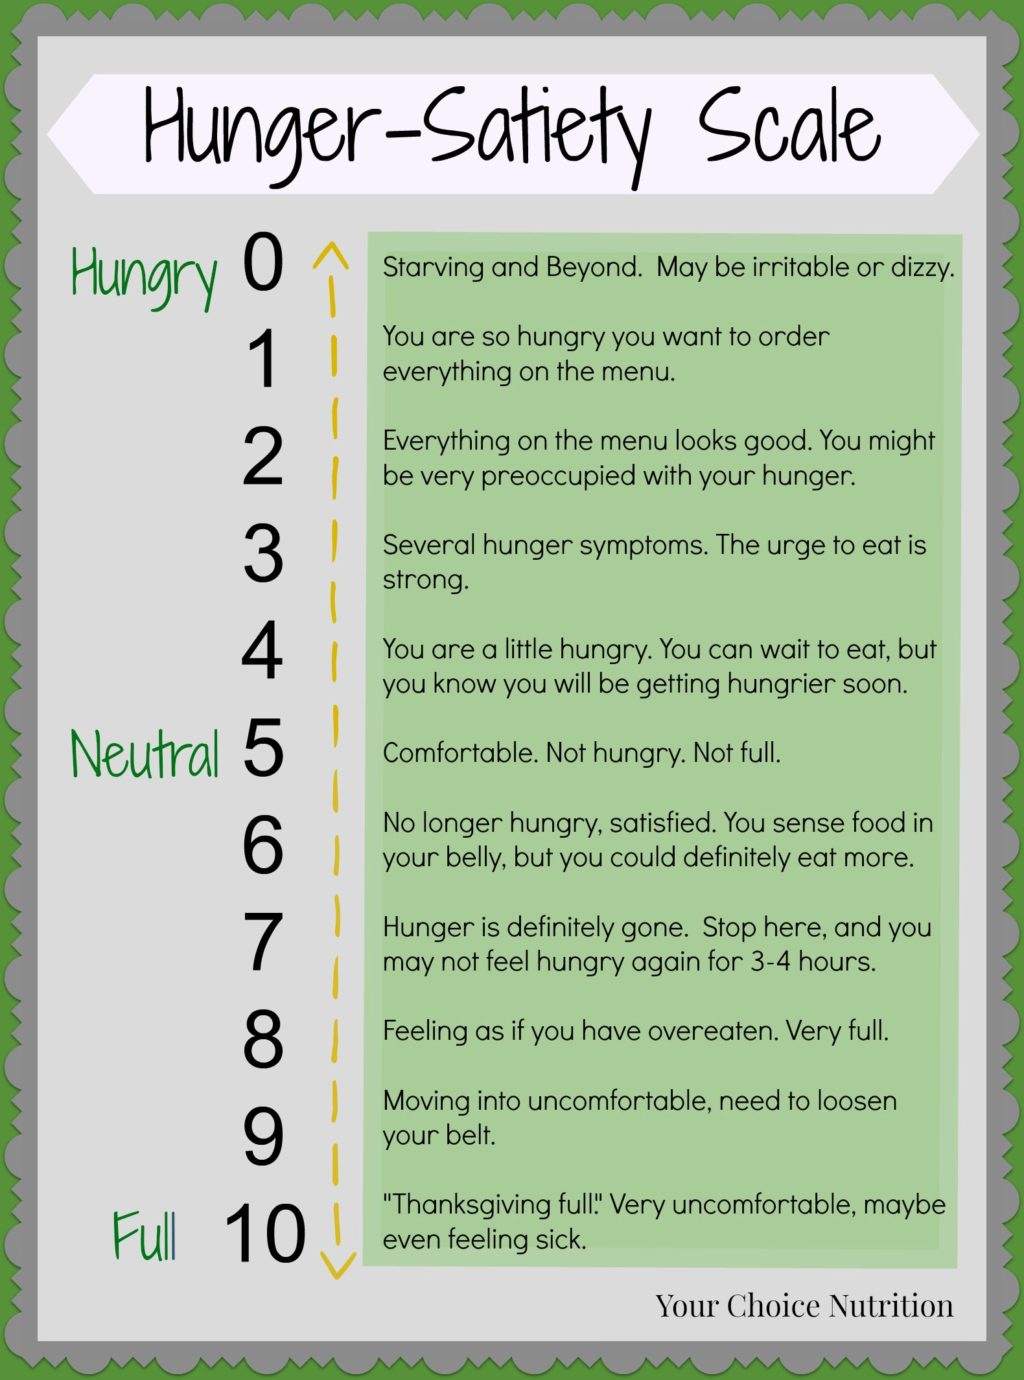 https://www.yourchoicenutrition.com/wp-content/uploads/2014/10/Hunger-Satiety-Scale-2-1.jpg